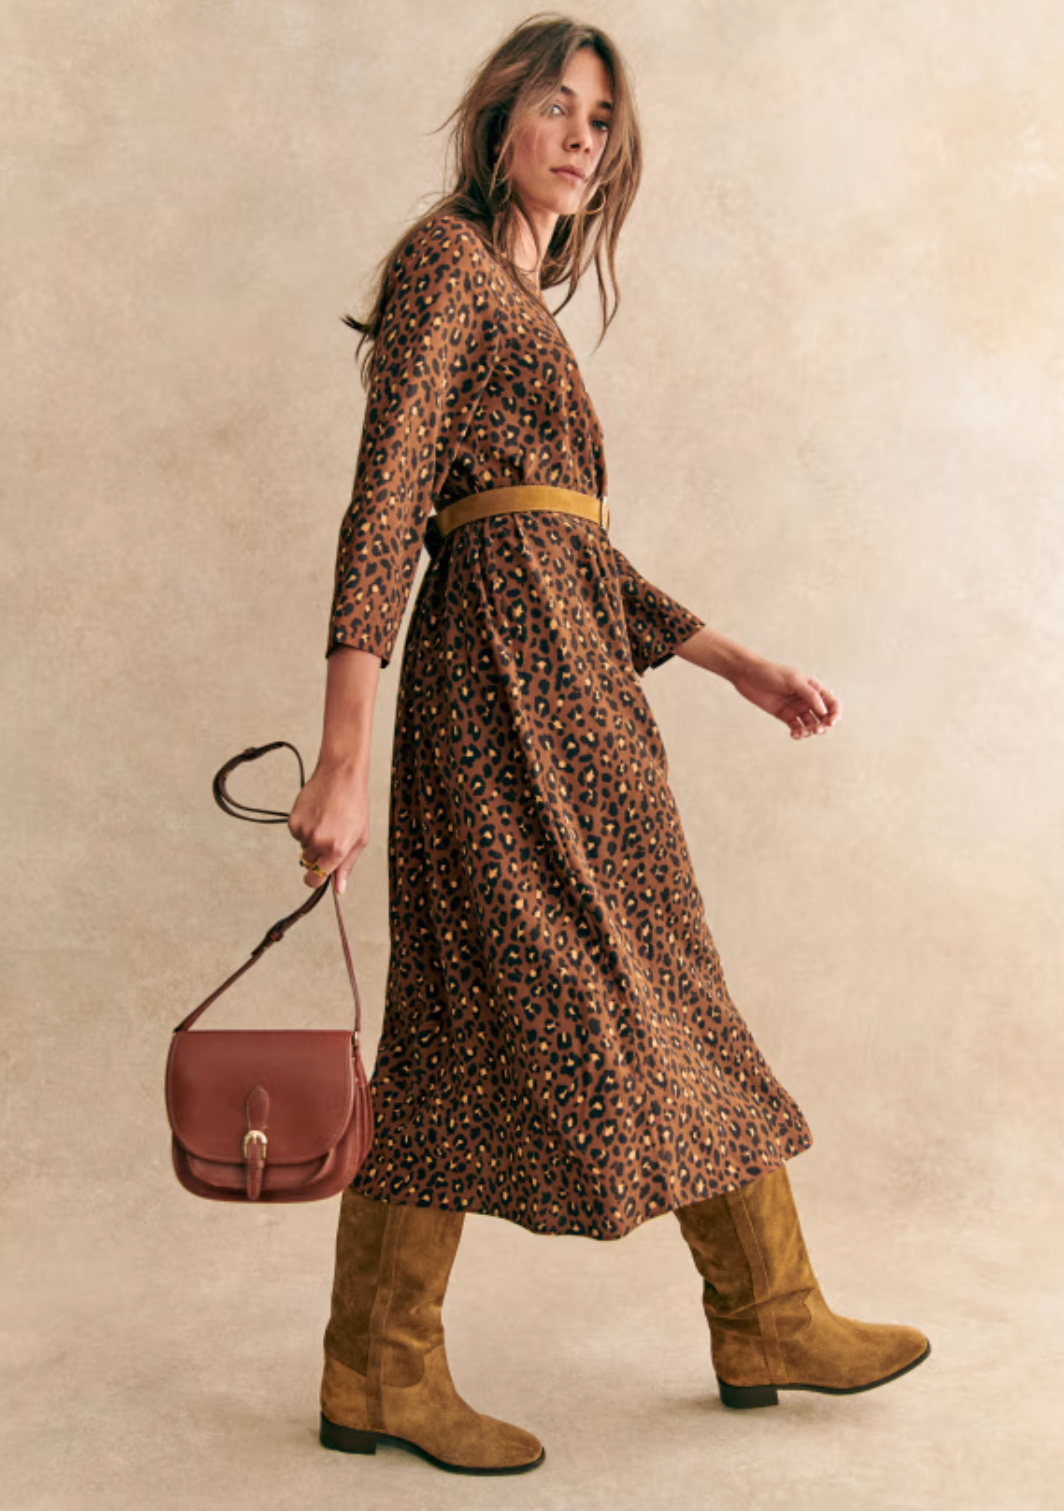 A model walks by holding a leather bag.